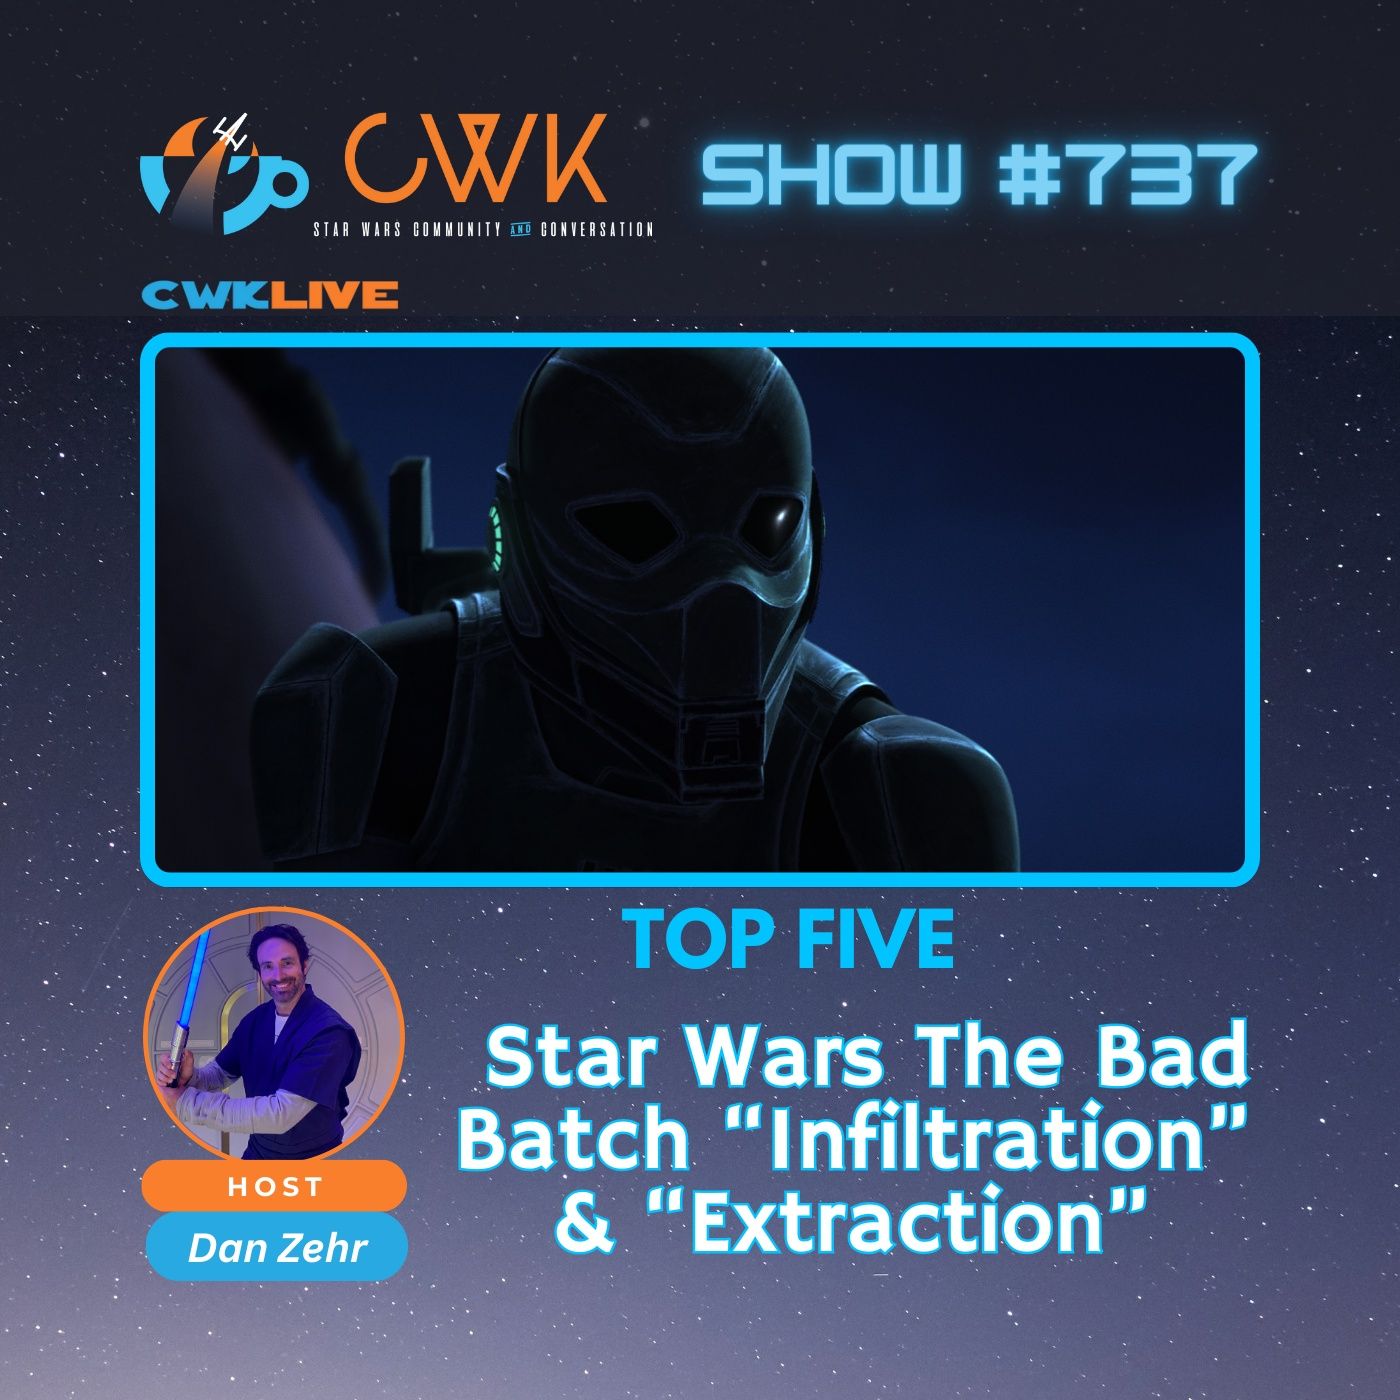 CWK Show #737 LIVE: Top Five Moments from The Bad Batch "Infiltration" & "Extraction"